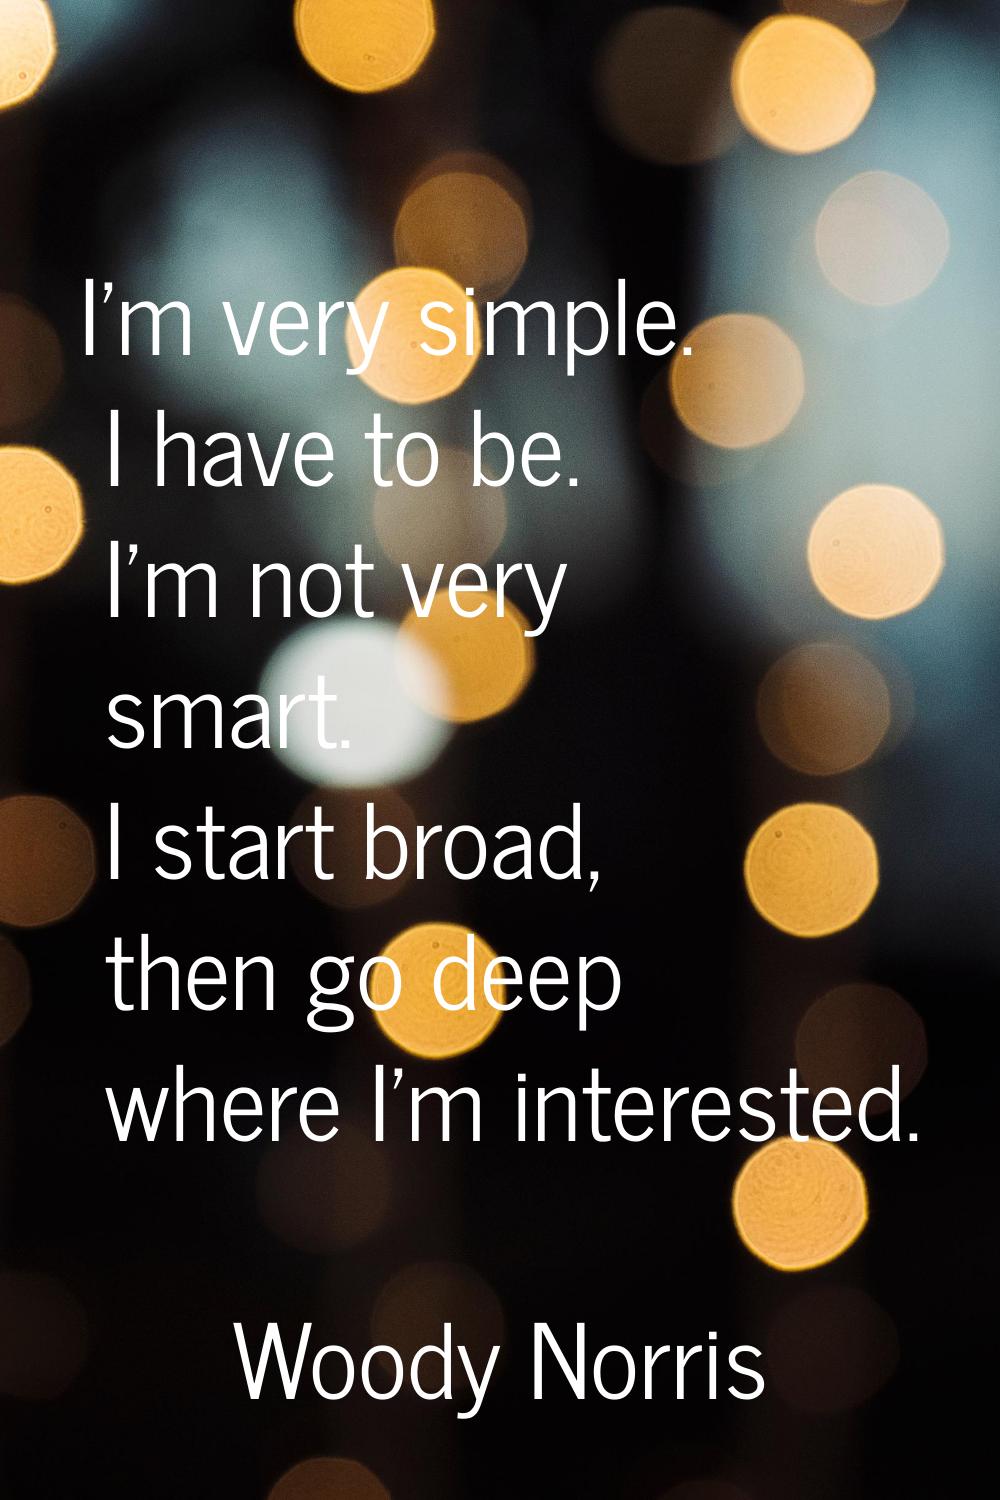 I'm very simple. I have to be. I'm not very smart. I start broad, then go deep where I'm interested